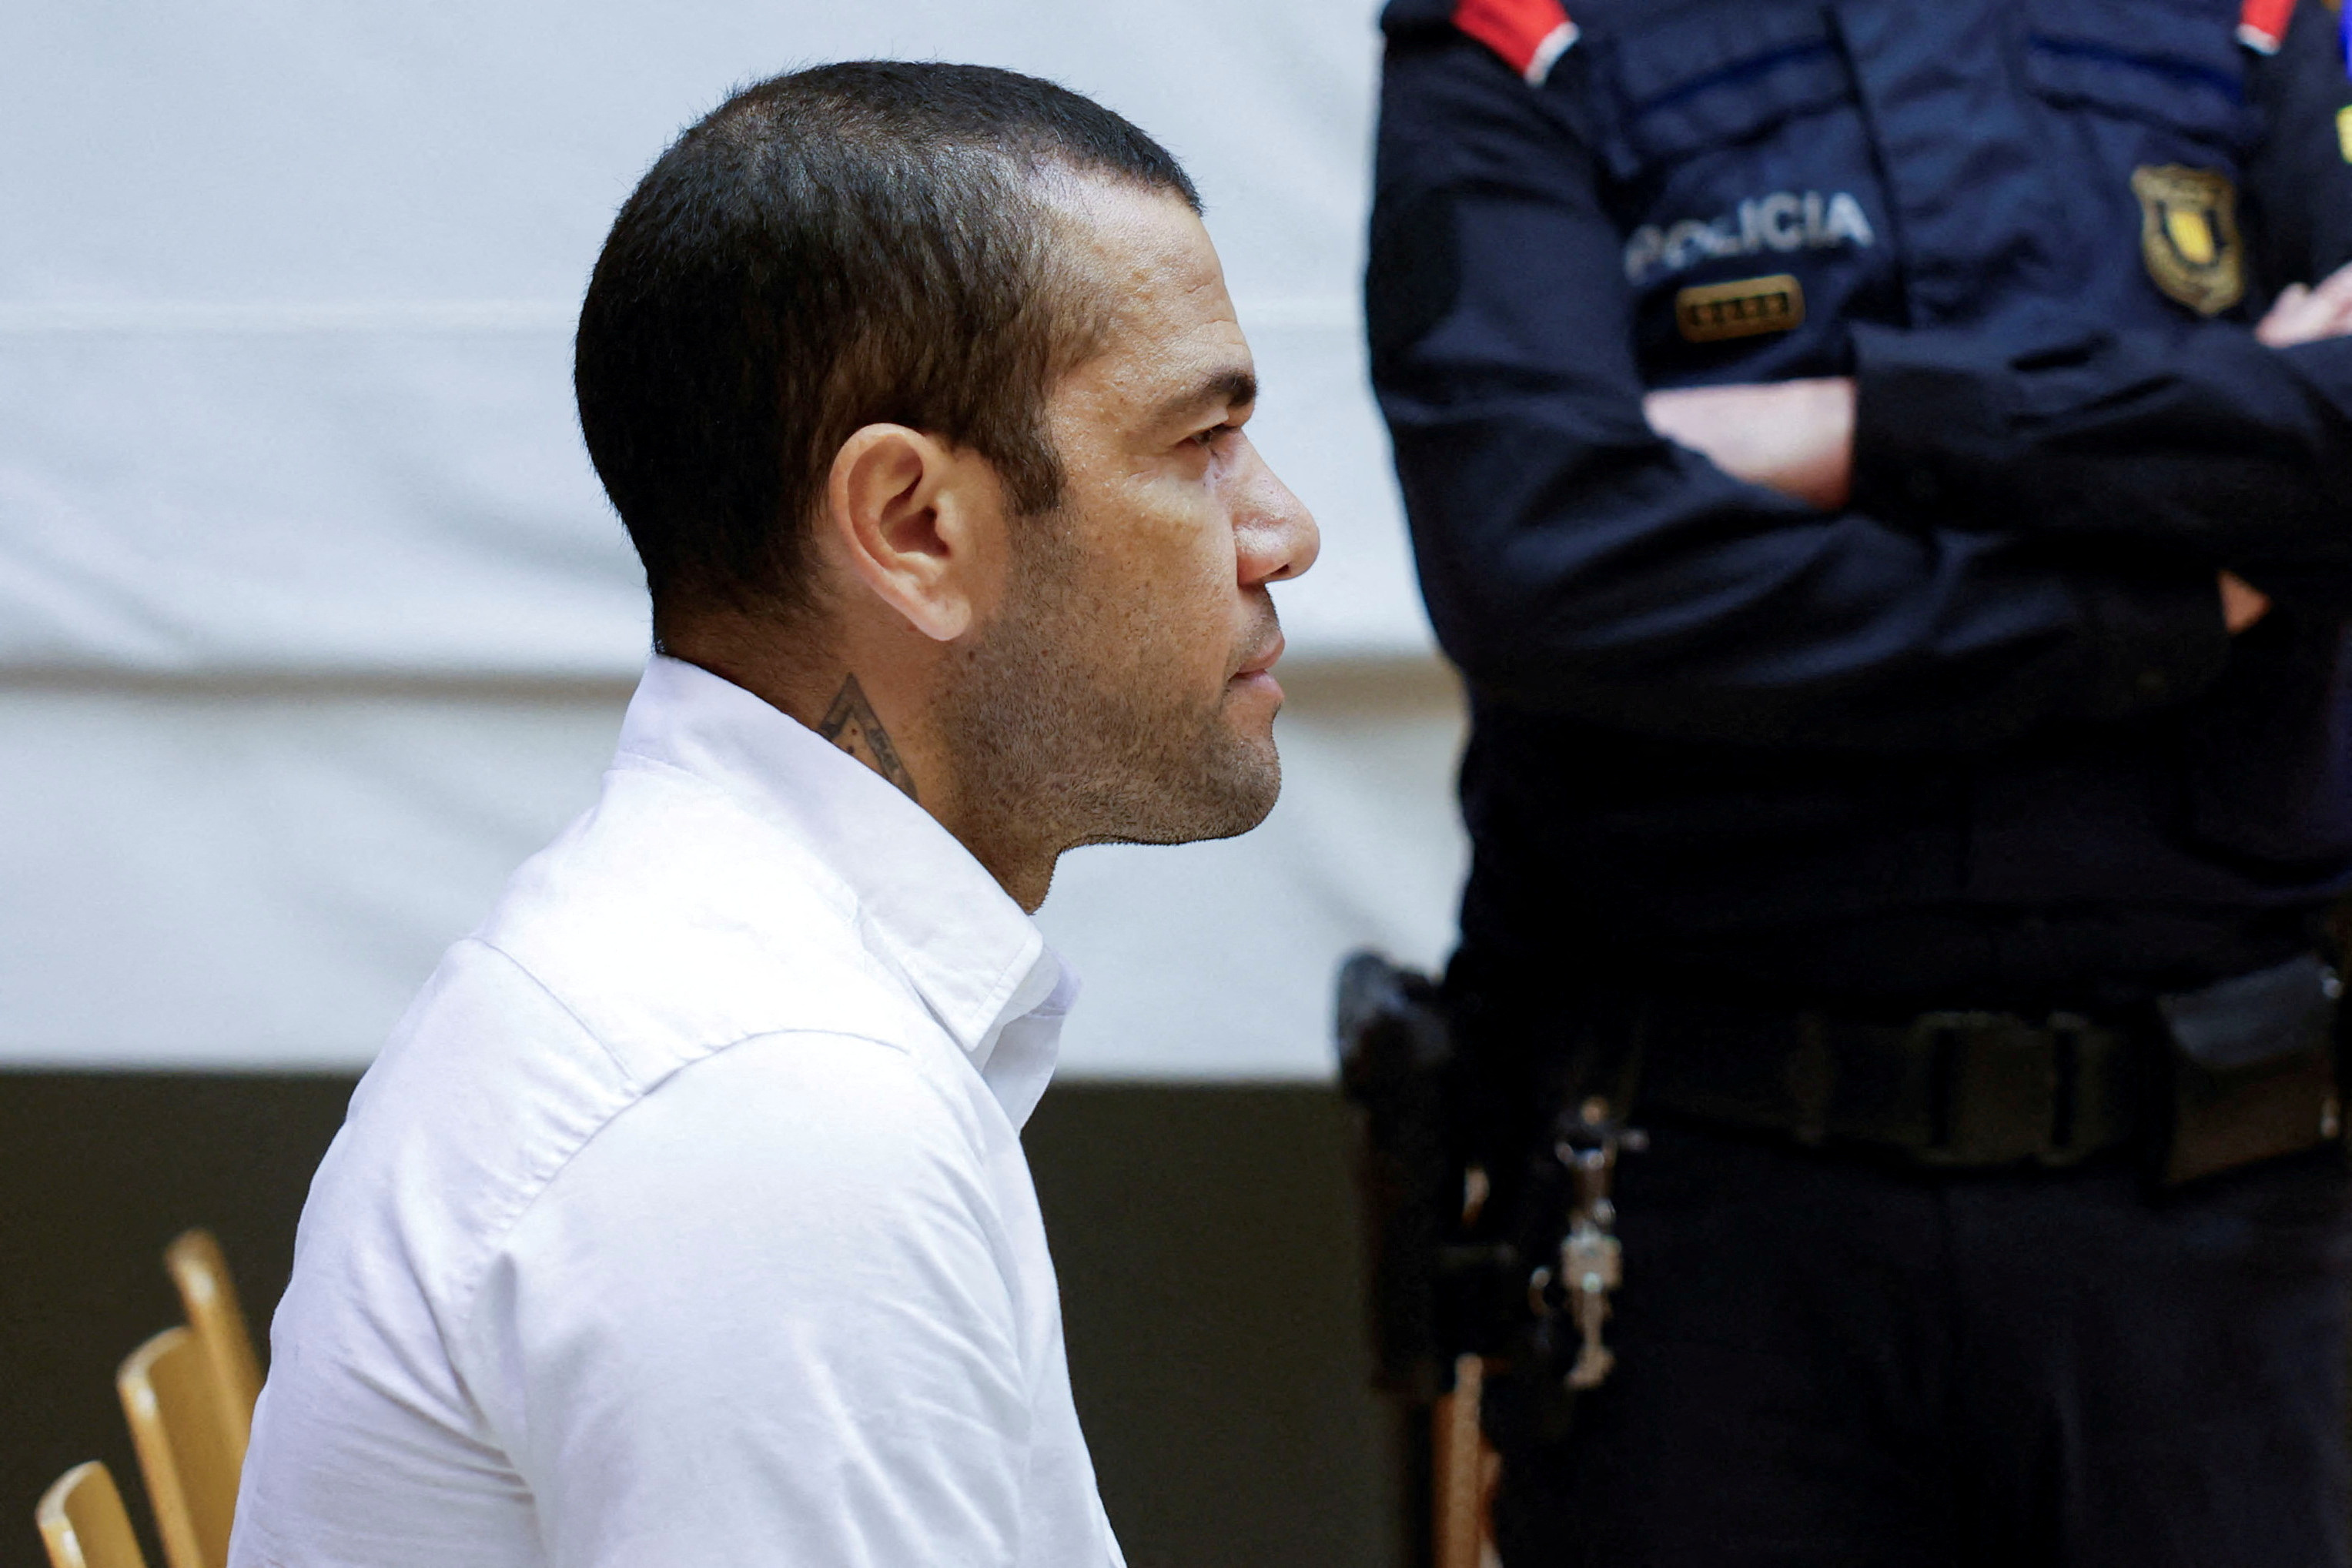 Brazil soccer player Dani Alves sits in court during the first day of his trial in Barcelona